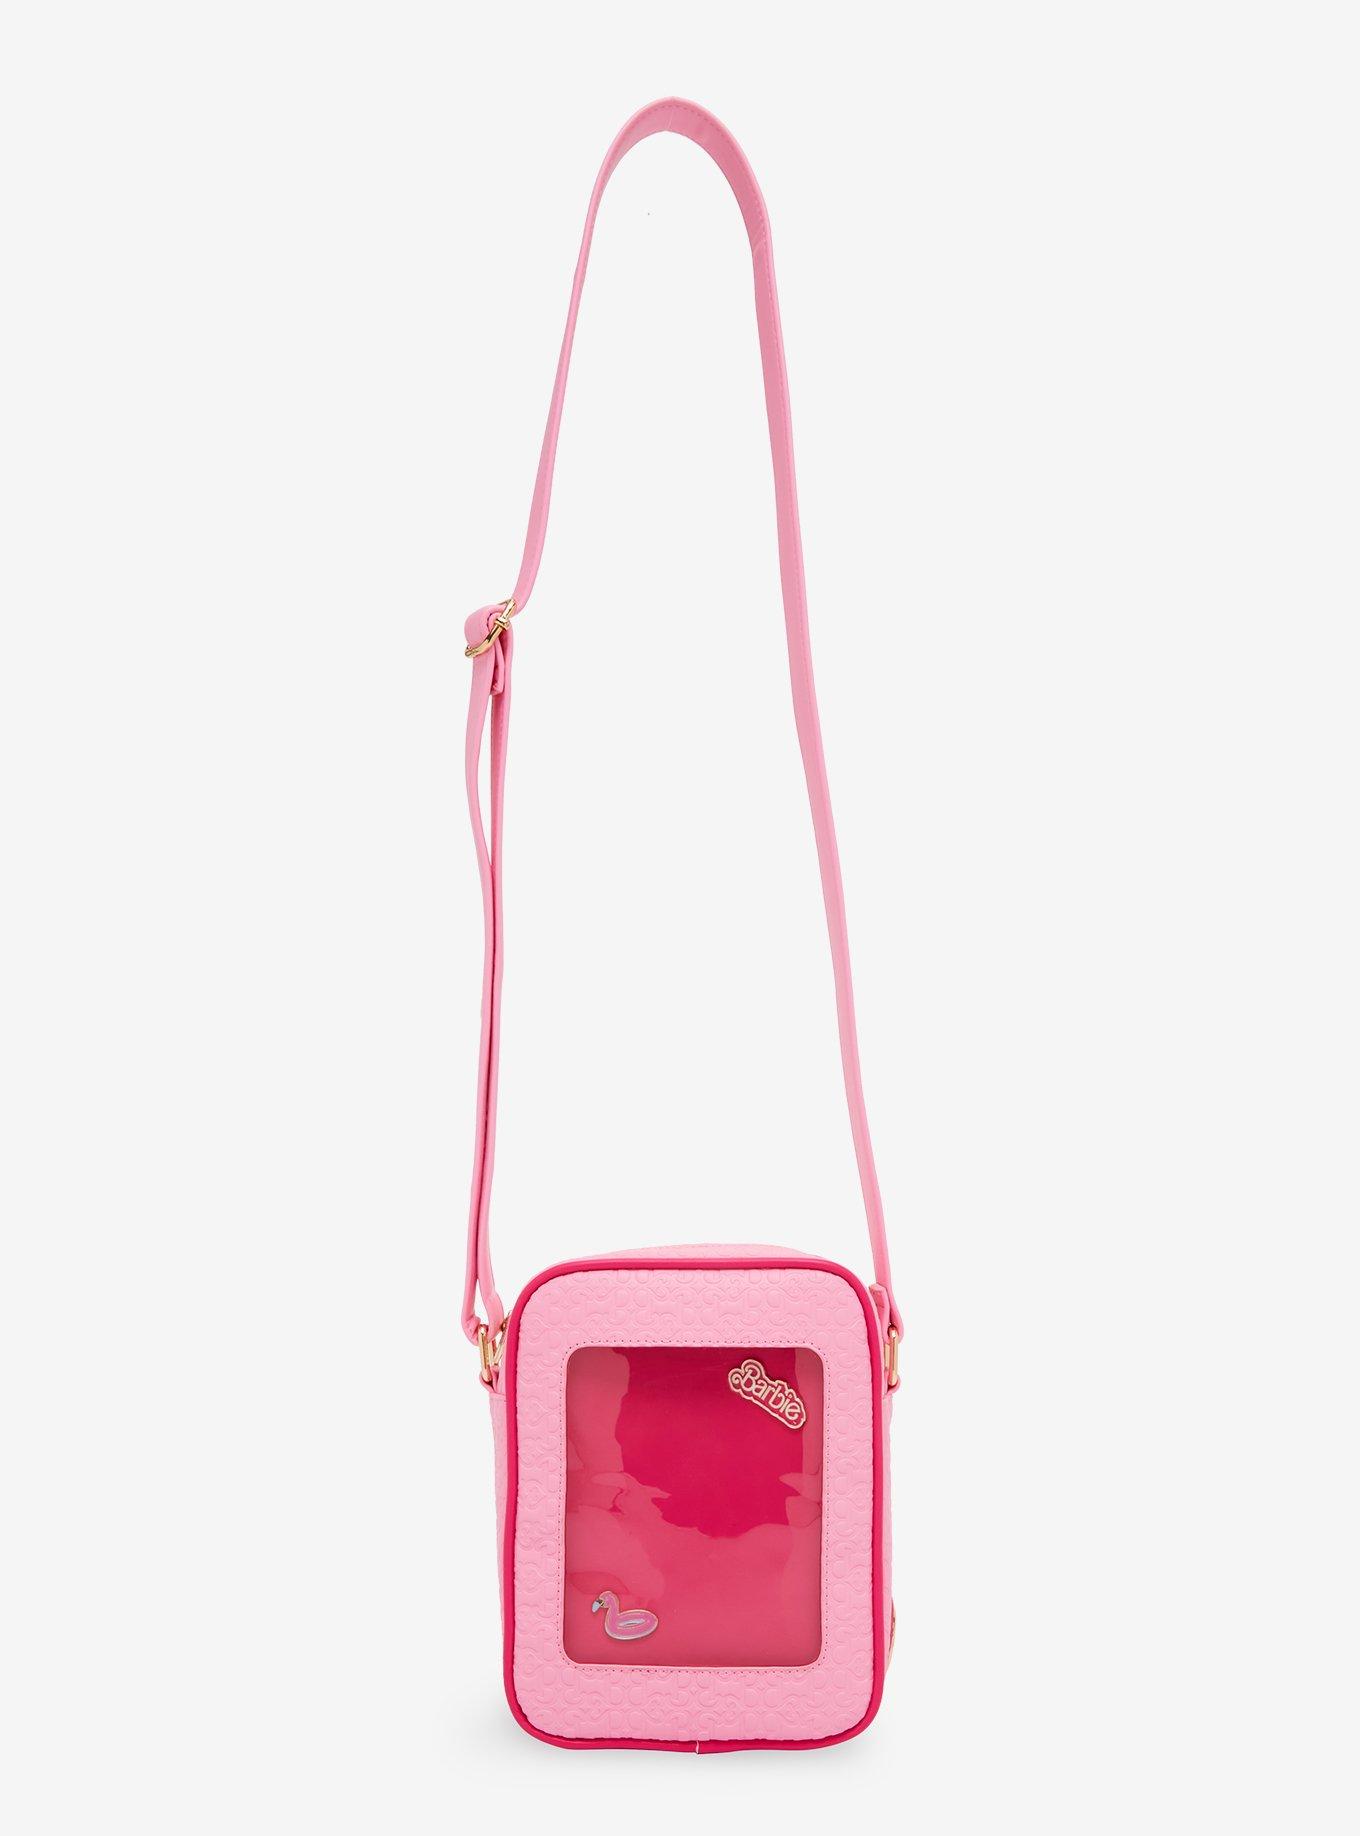 Our Universe Barbie Heart Figural Crossbody Bag - BoxLunch Exclusive